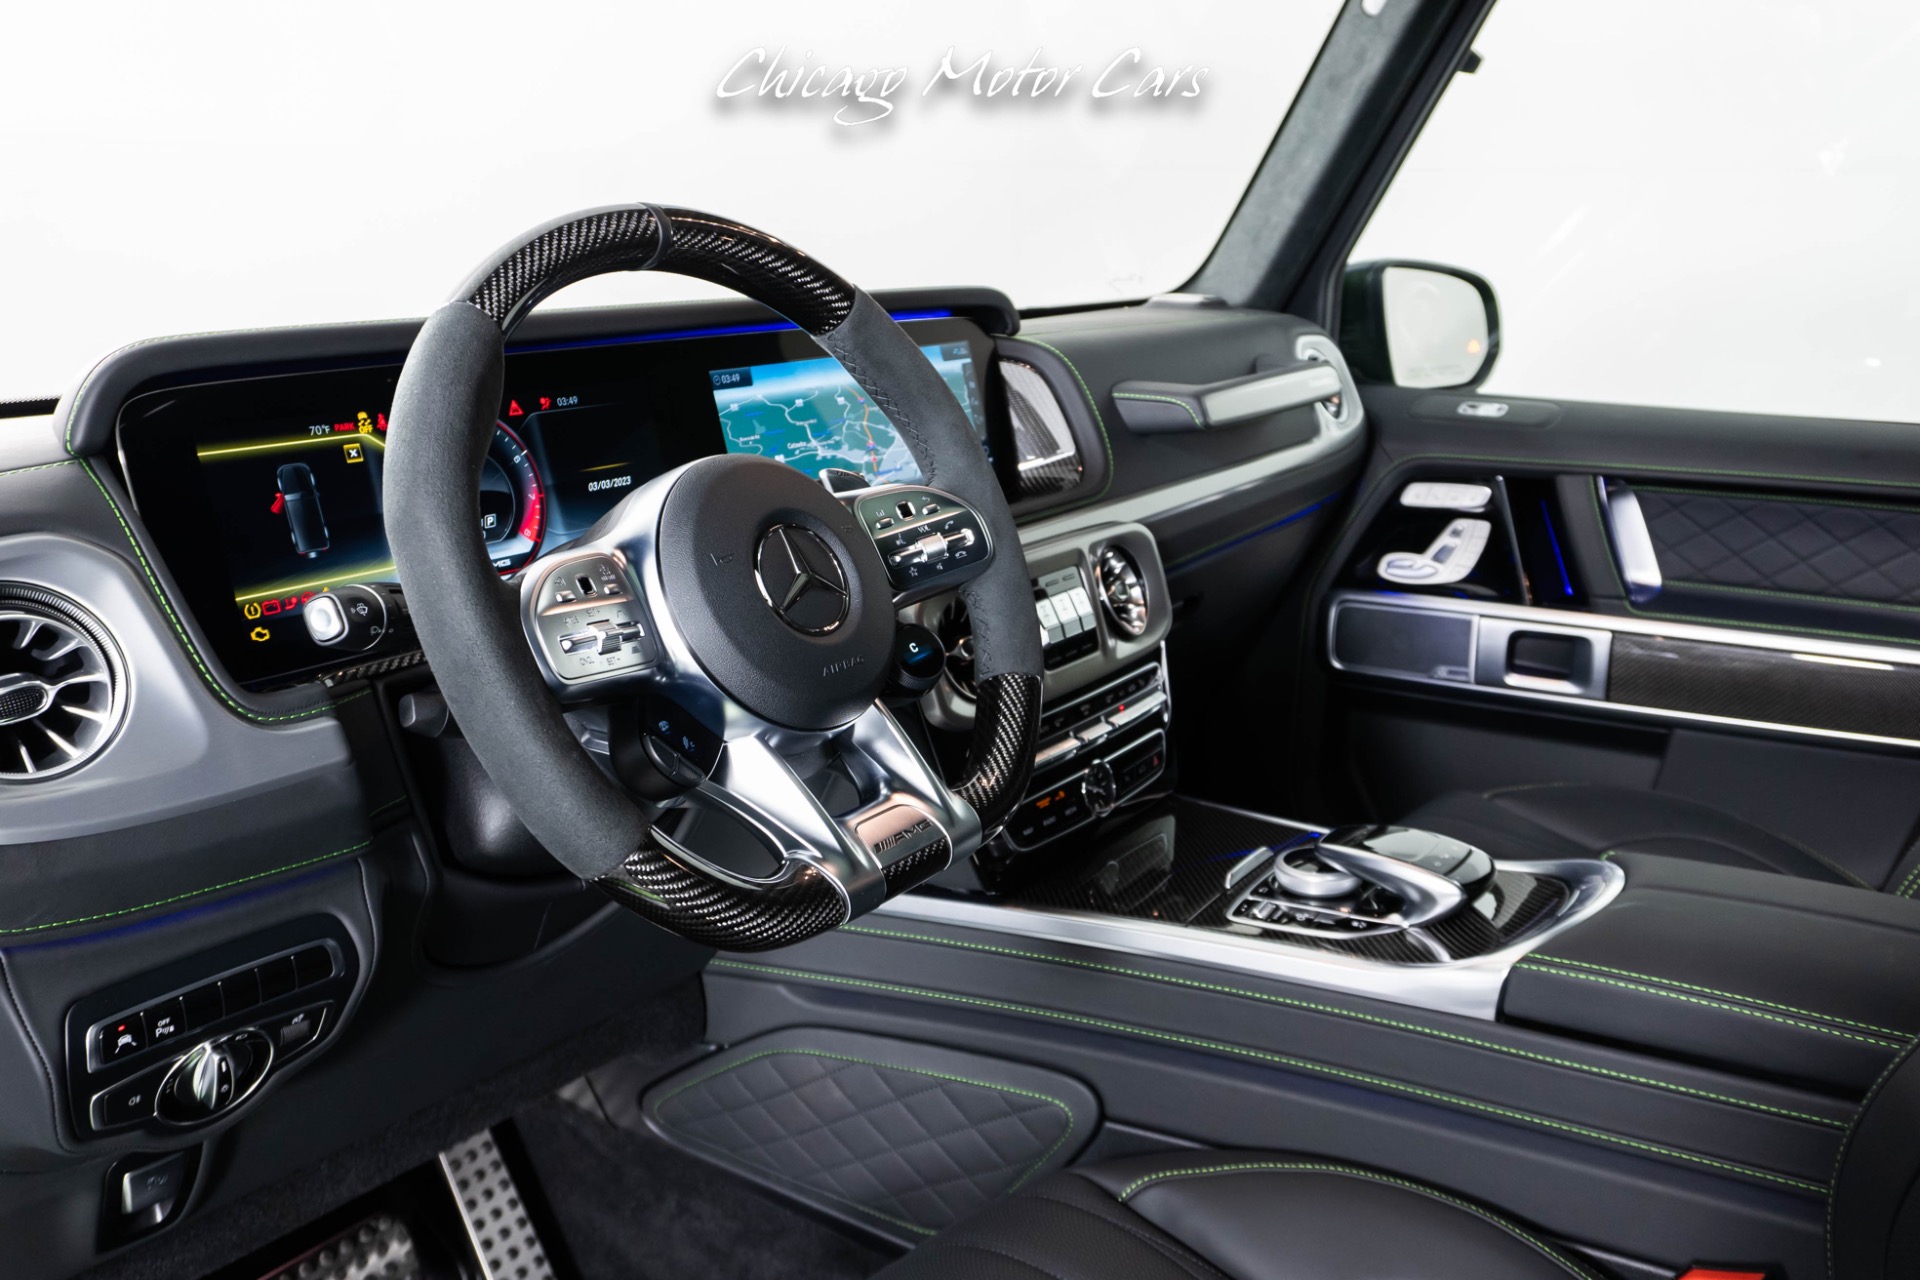 Used-2022-Mercedes-Benz-AMG-G63-HELL-MAGNO-FINISH-EXCLUSIVE-EDITION-INTERIOR-PACKAGE-PLUS-MONOBLOCK-WHEELS